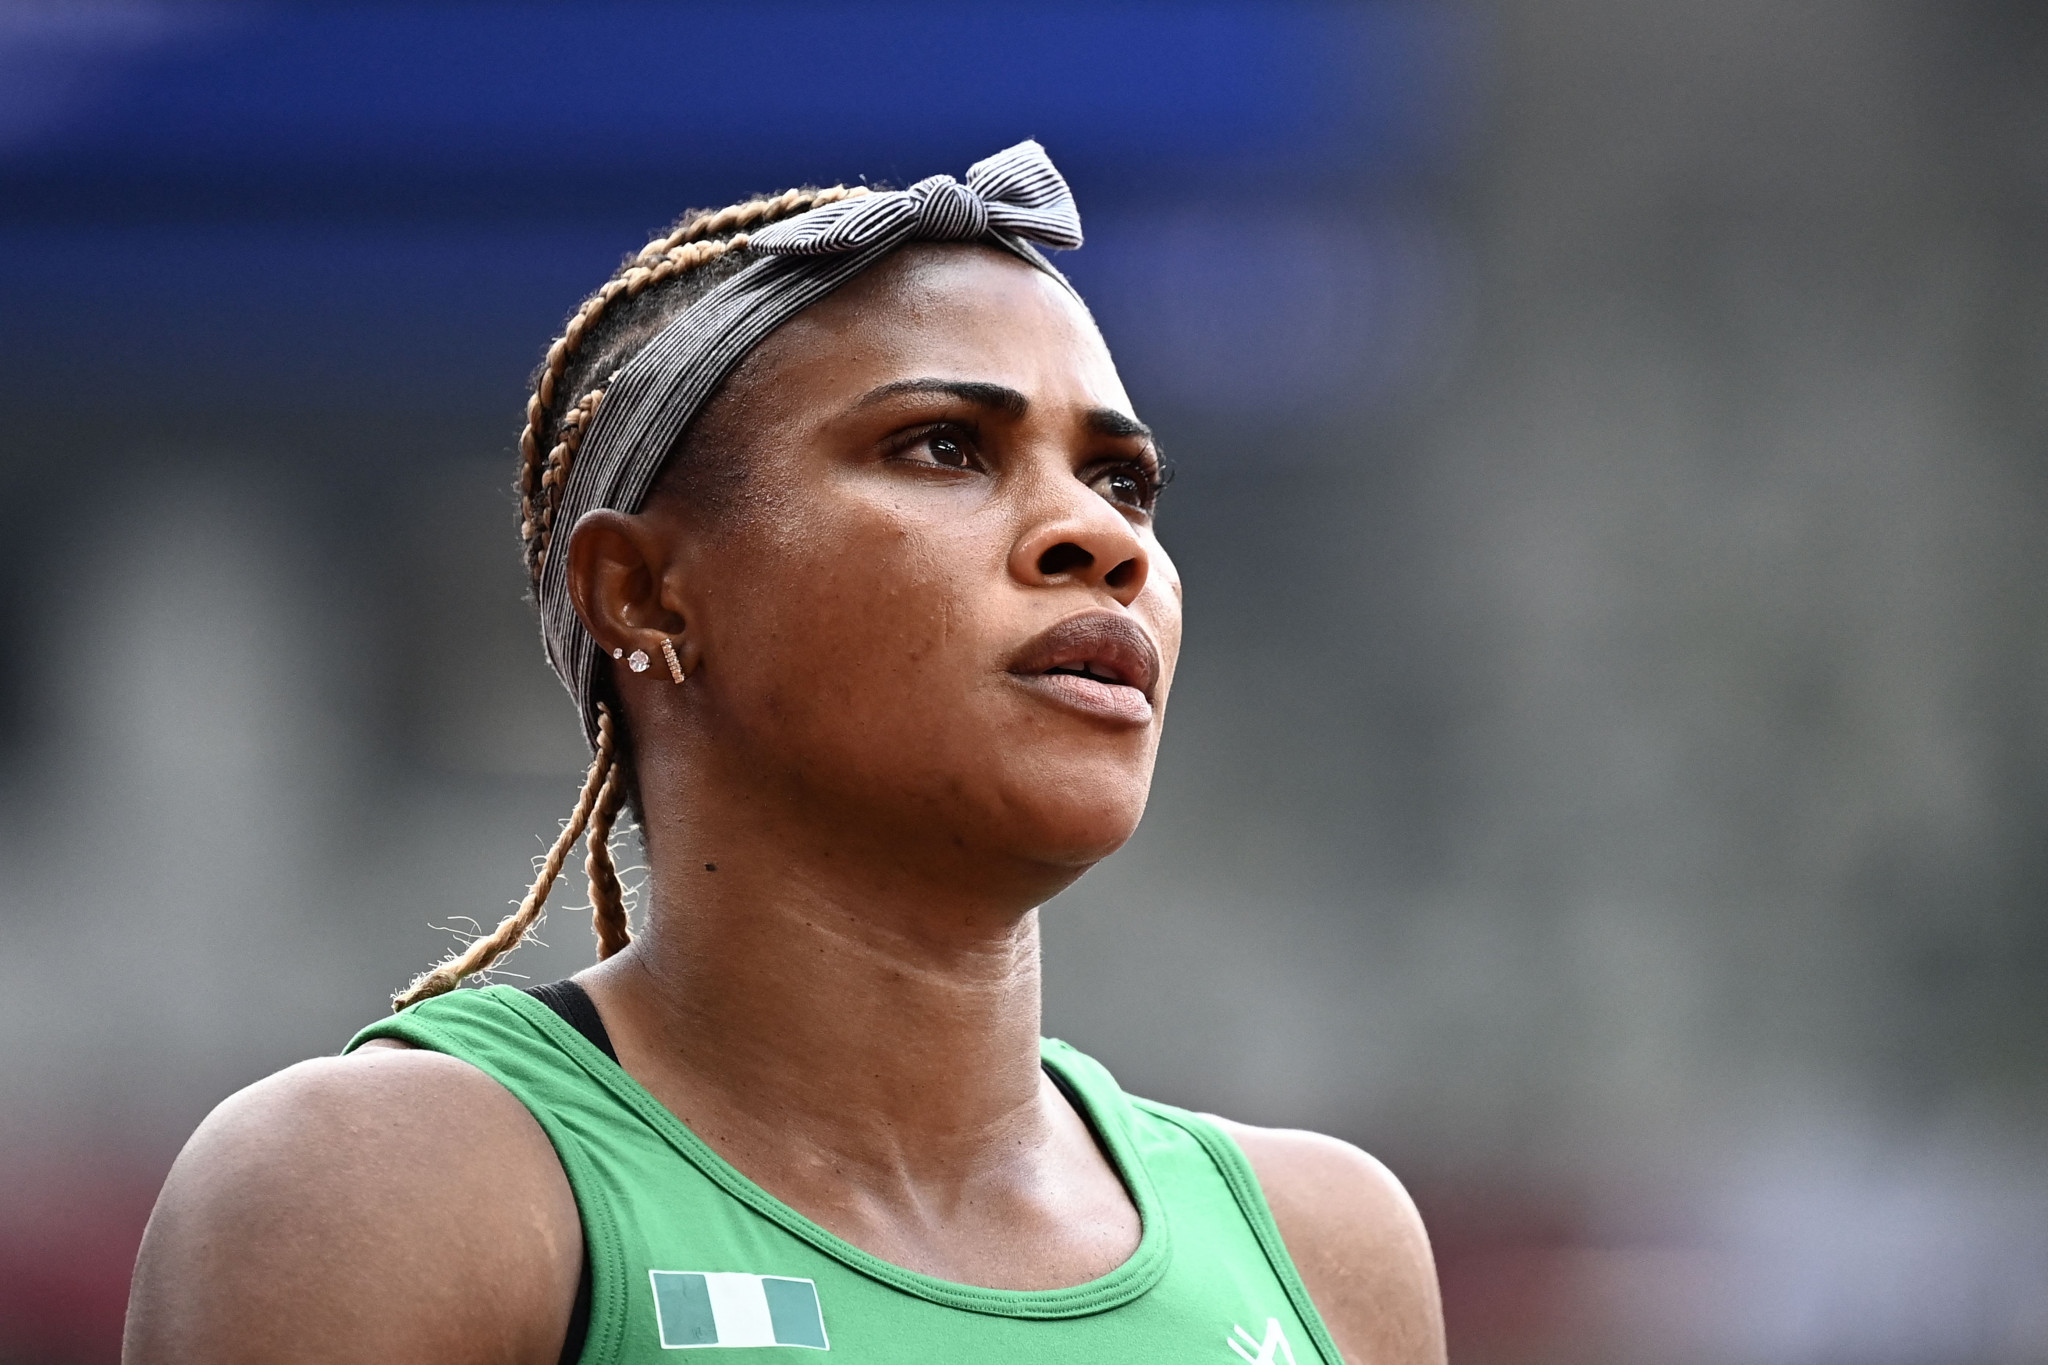 Blessing Okagbare has been provisionally suspended and will miss the remainder of Tokyo 2020 ©Getty Images